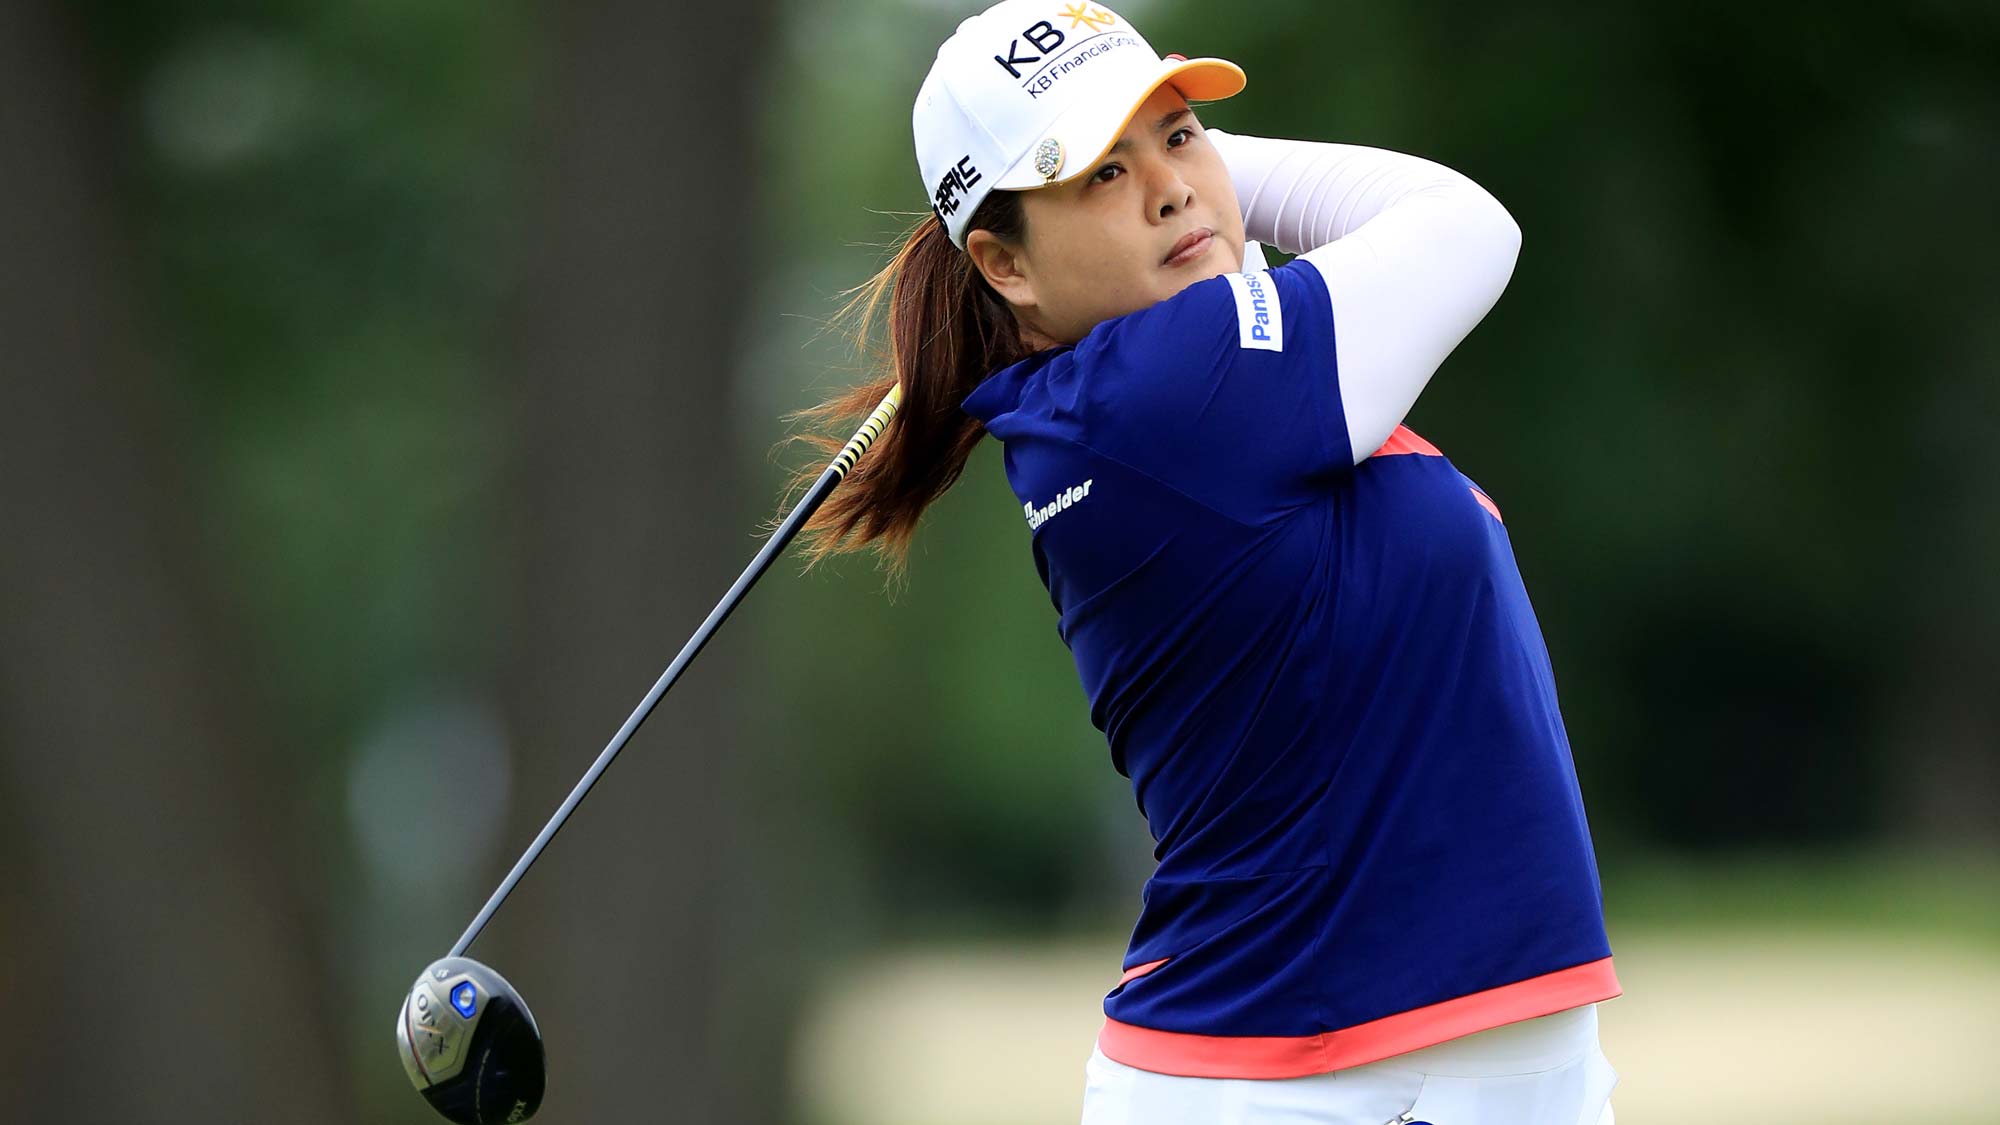 Inbee Park of South Korea plays her tee shot on the par 5, seventh hole during the third round of the 2019 Women's PGA Championship